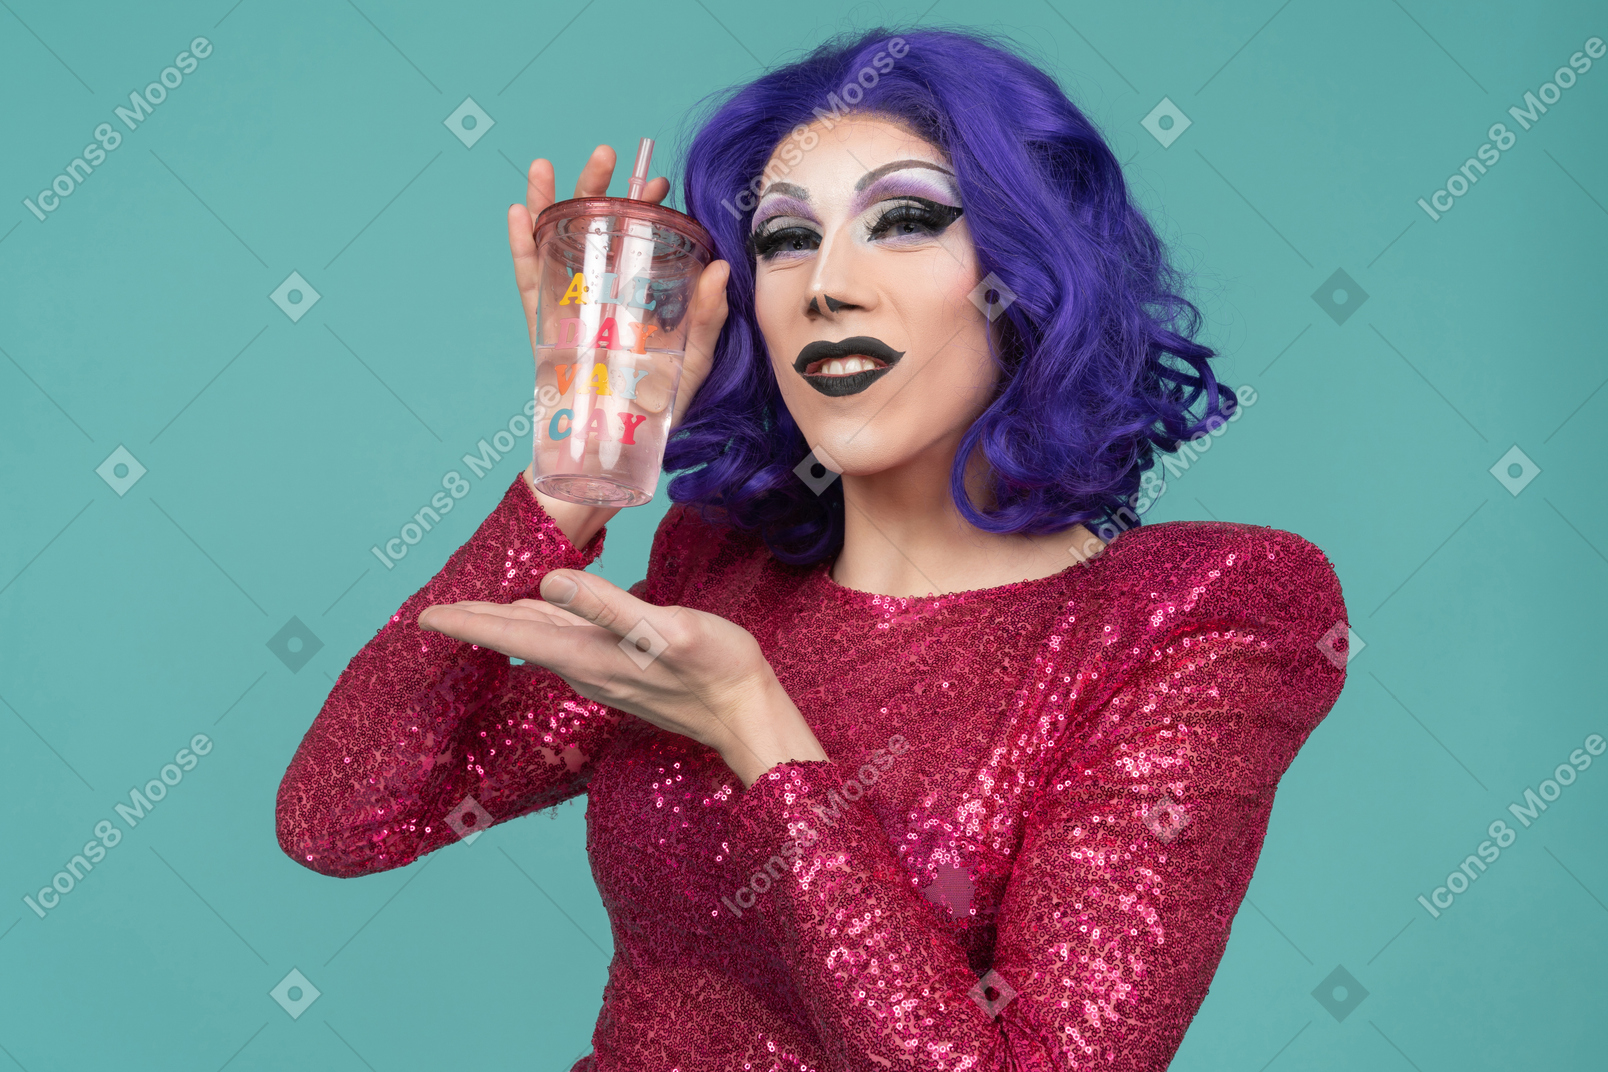 Portrait of a drag queen in pink dress smiling while showing off plastic cup